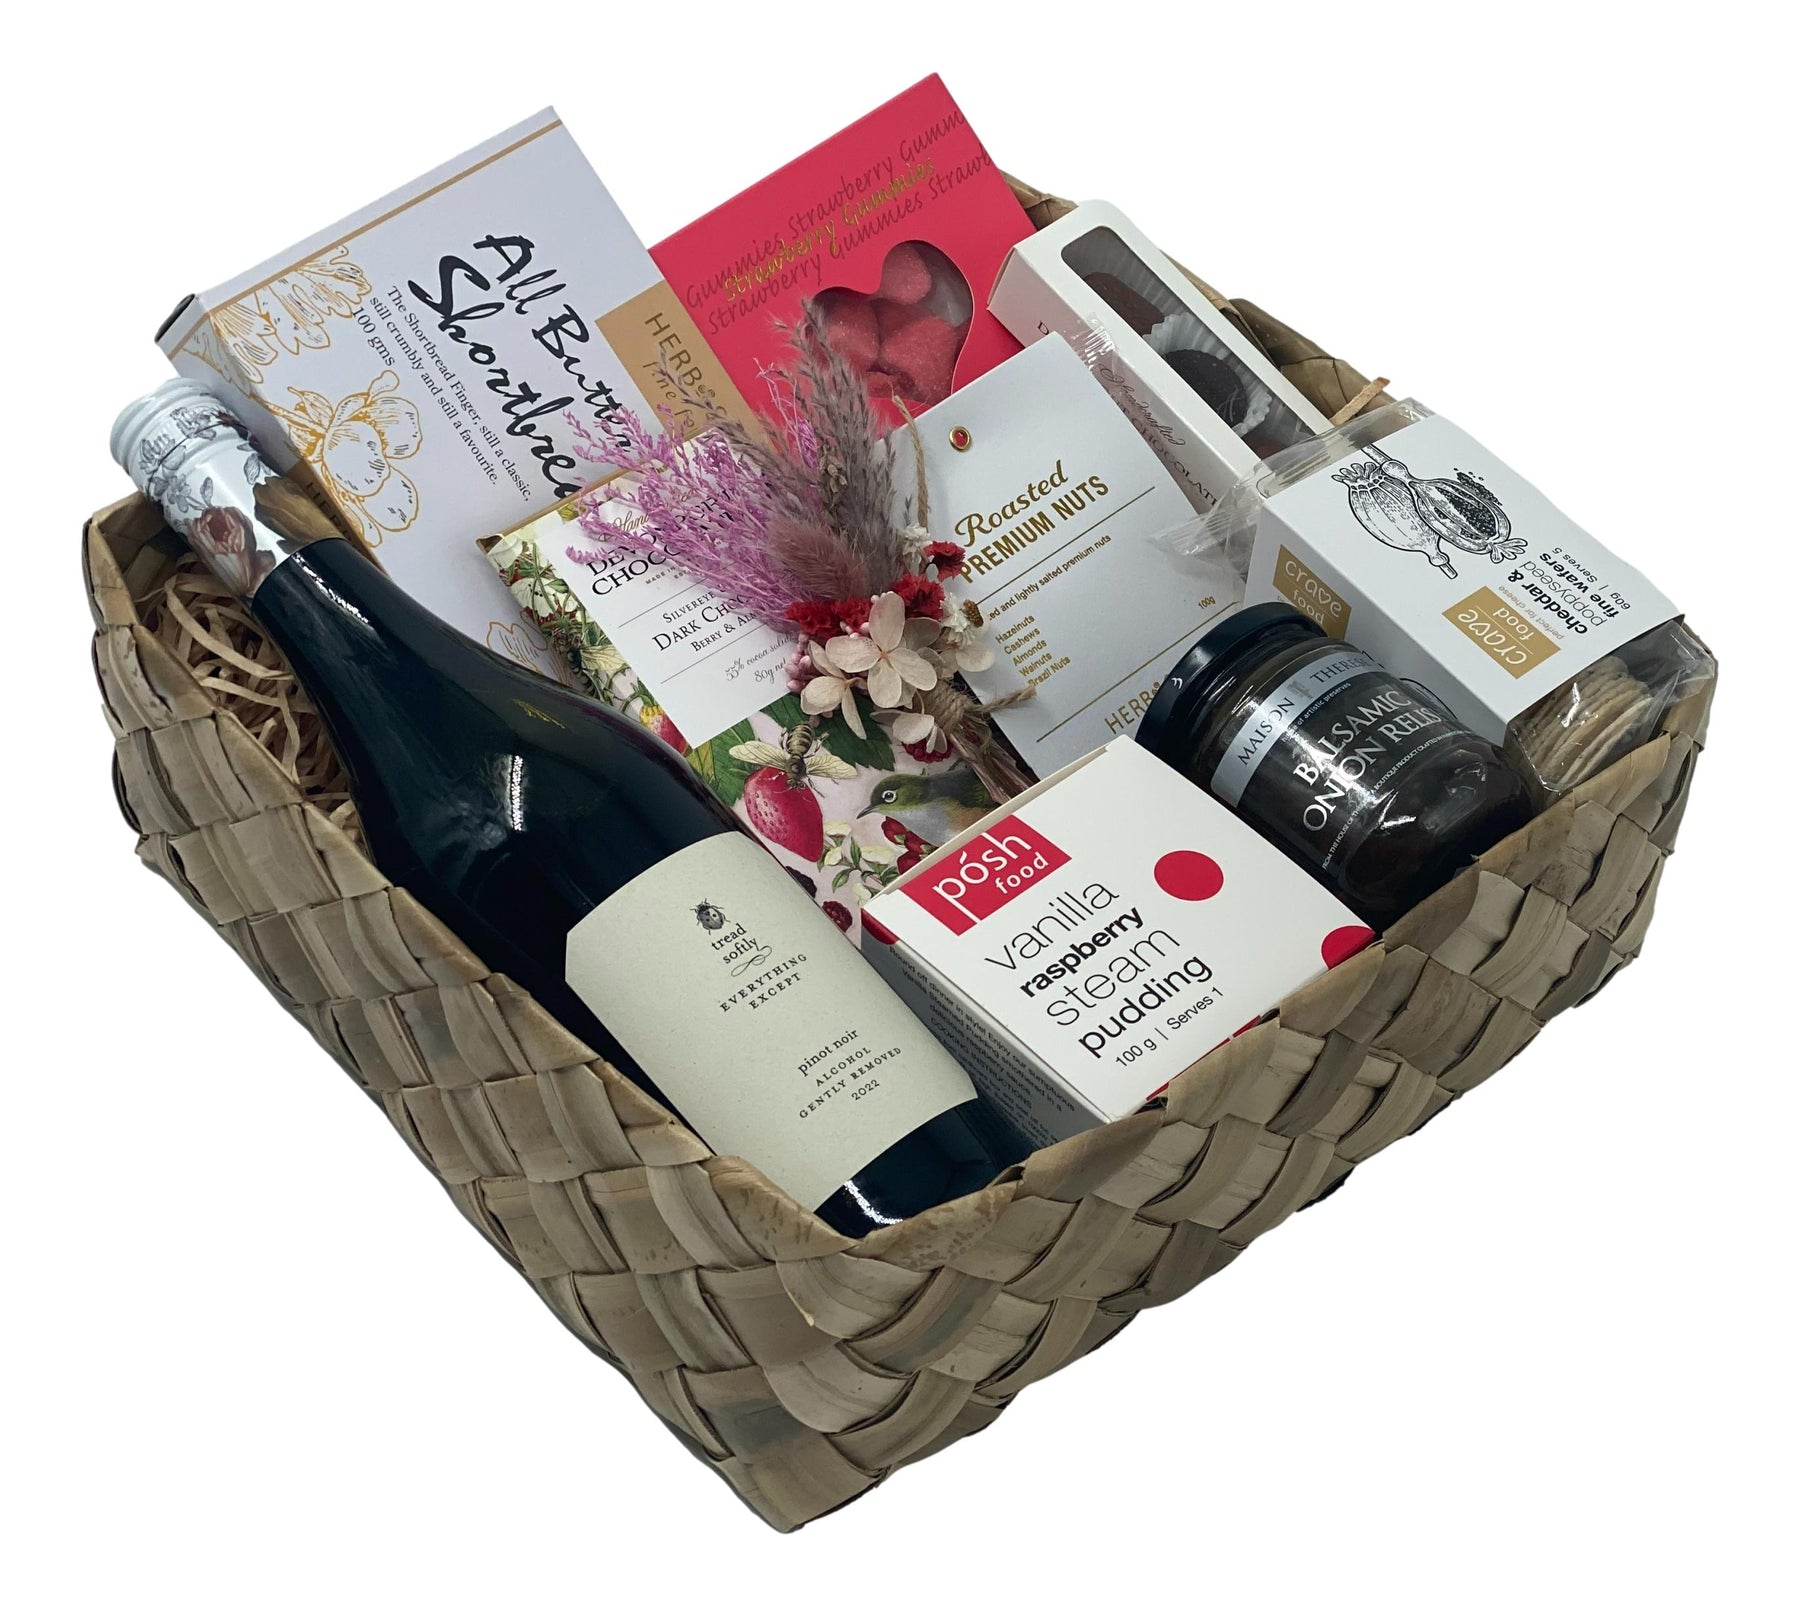 NZ Sympathy Condolence Gift Baskets and Hampers - Basket Creations